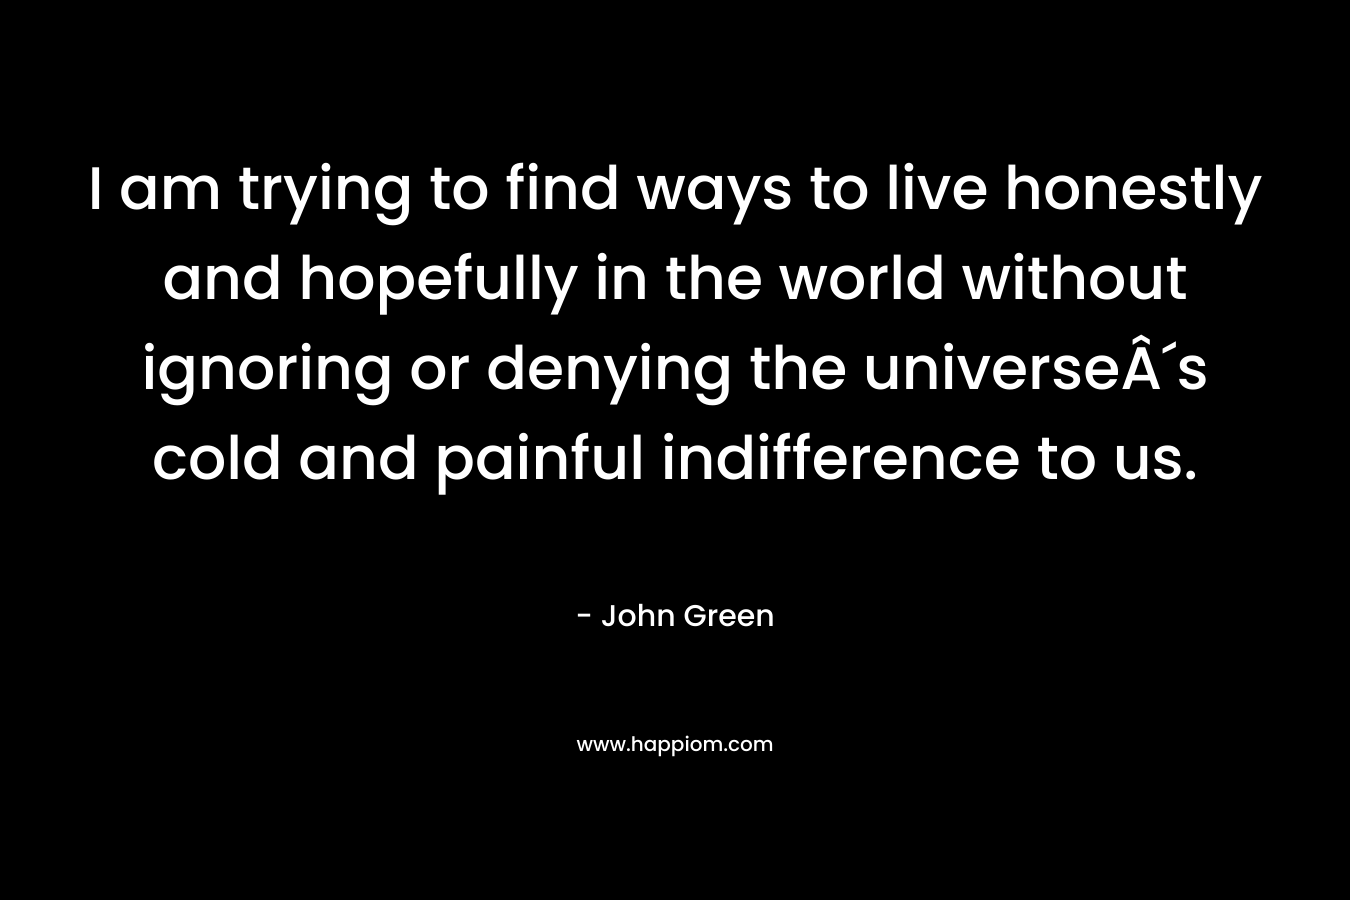 I am trying to find ways to live honestly and hopefully in the world without ignoring or denying the universeÂ´s cold and painful indifference to us. – John Green